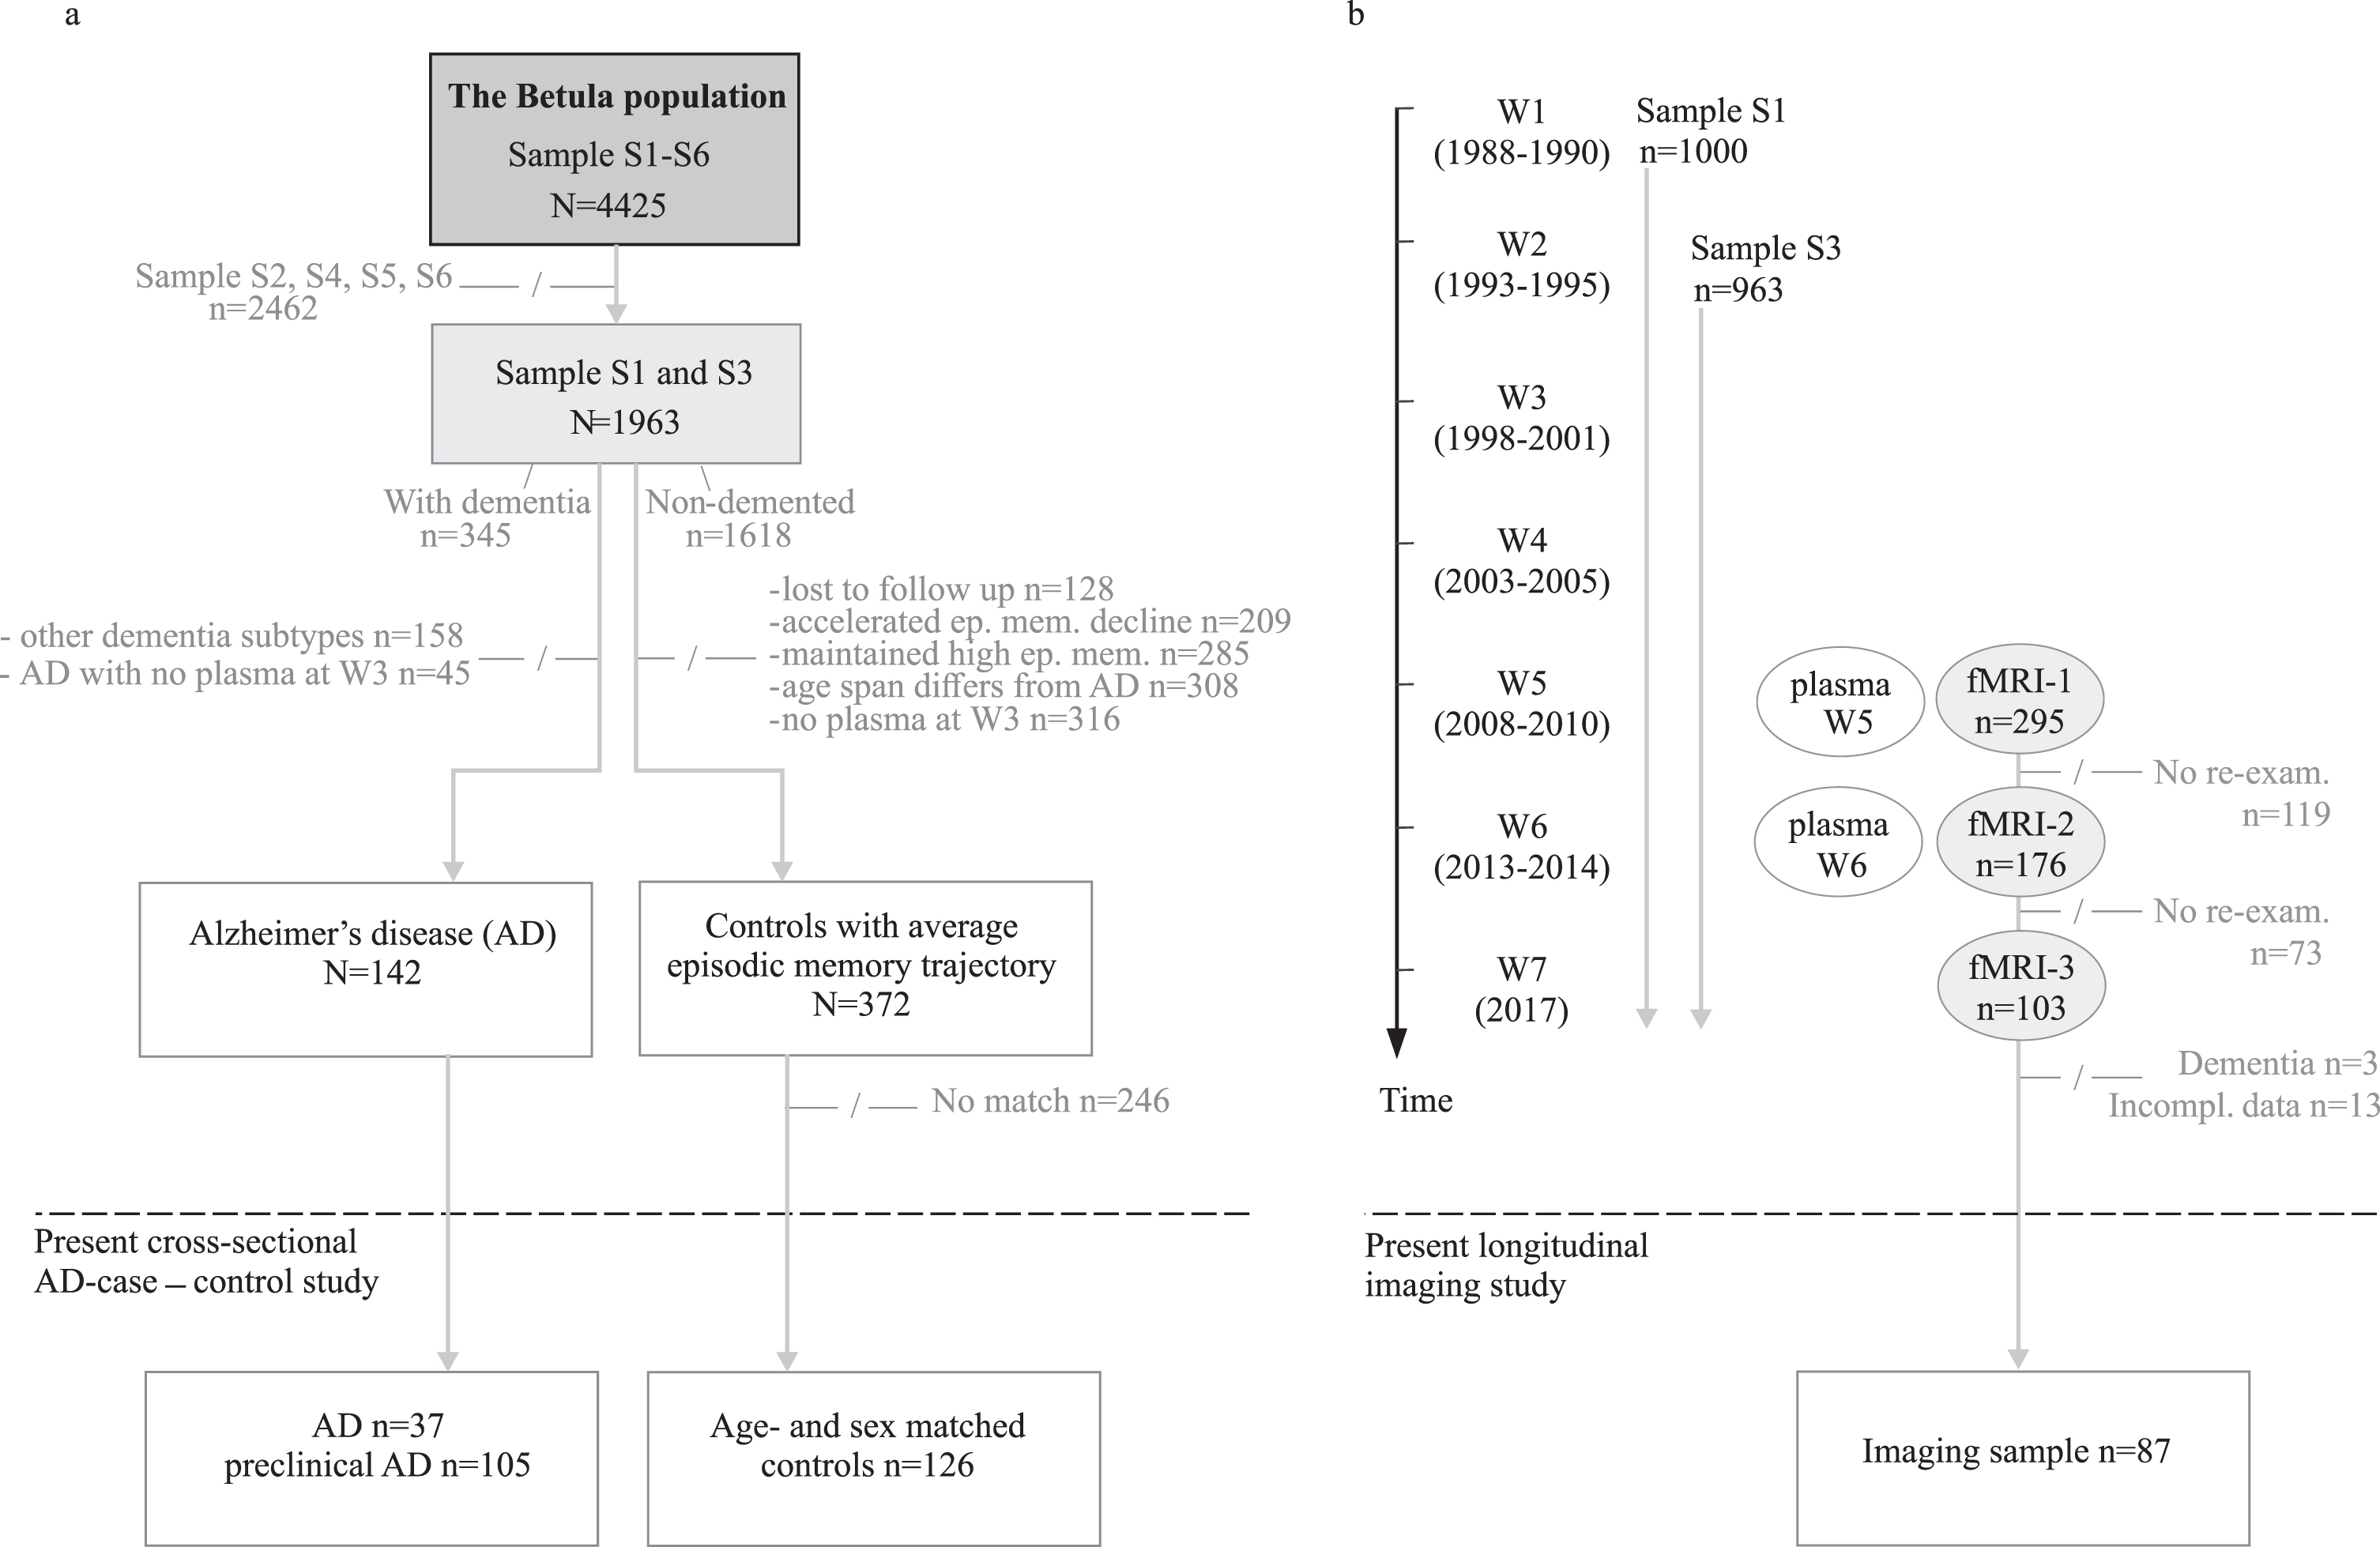 a) Flowchart of cross-sectional AD-case –control study with Wave 3 (W3) as study baseline, and (b) longitudinal imaging study with Wave 5 as study baseline. –/–, not included in the present study; W, wave; S, sample.